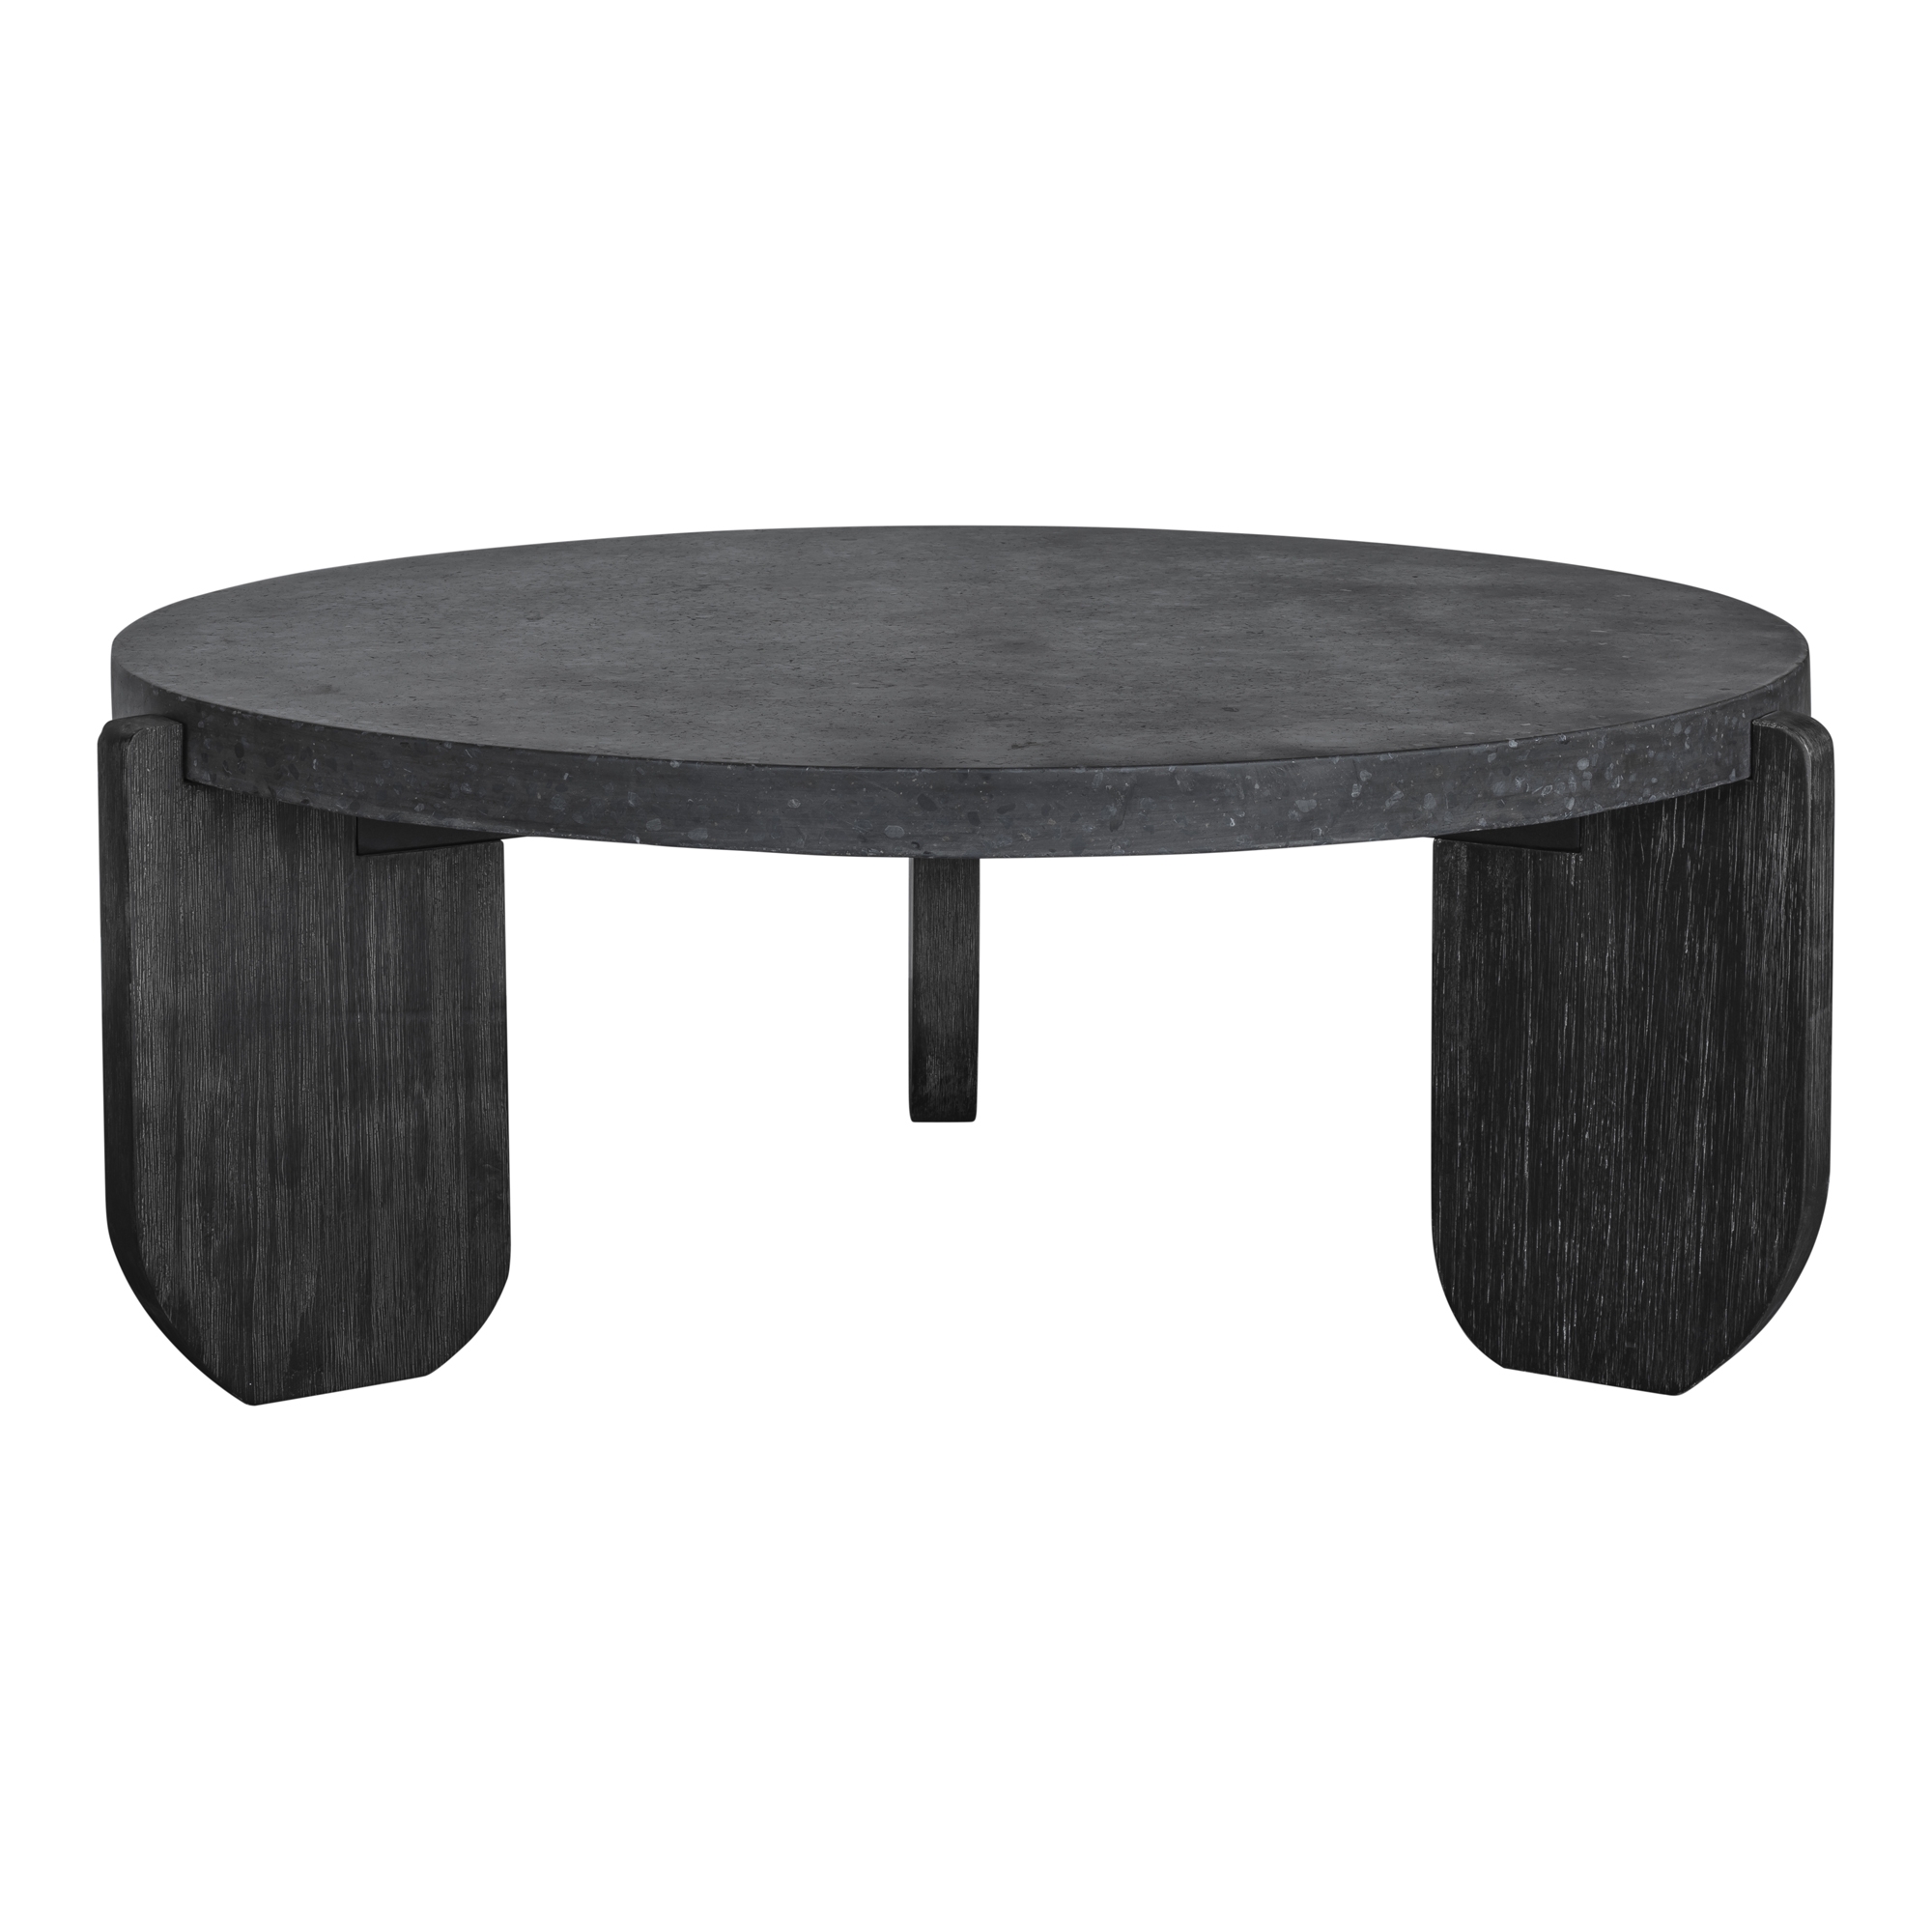 WUNDER COFFEE TABLE - Image 0